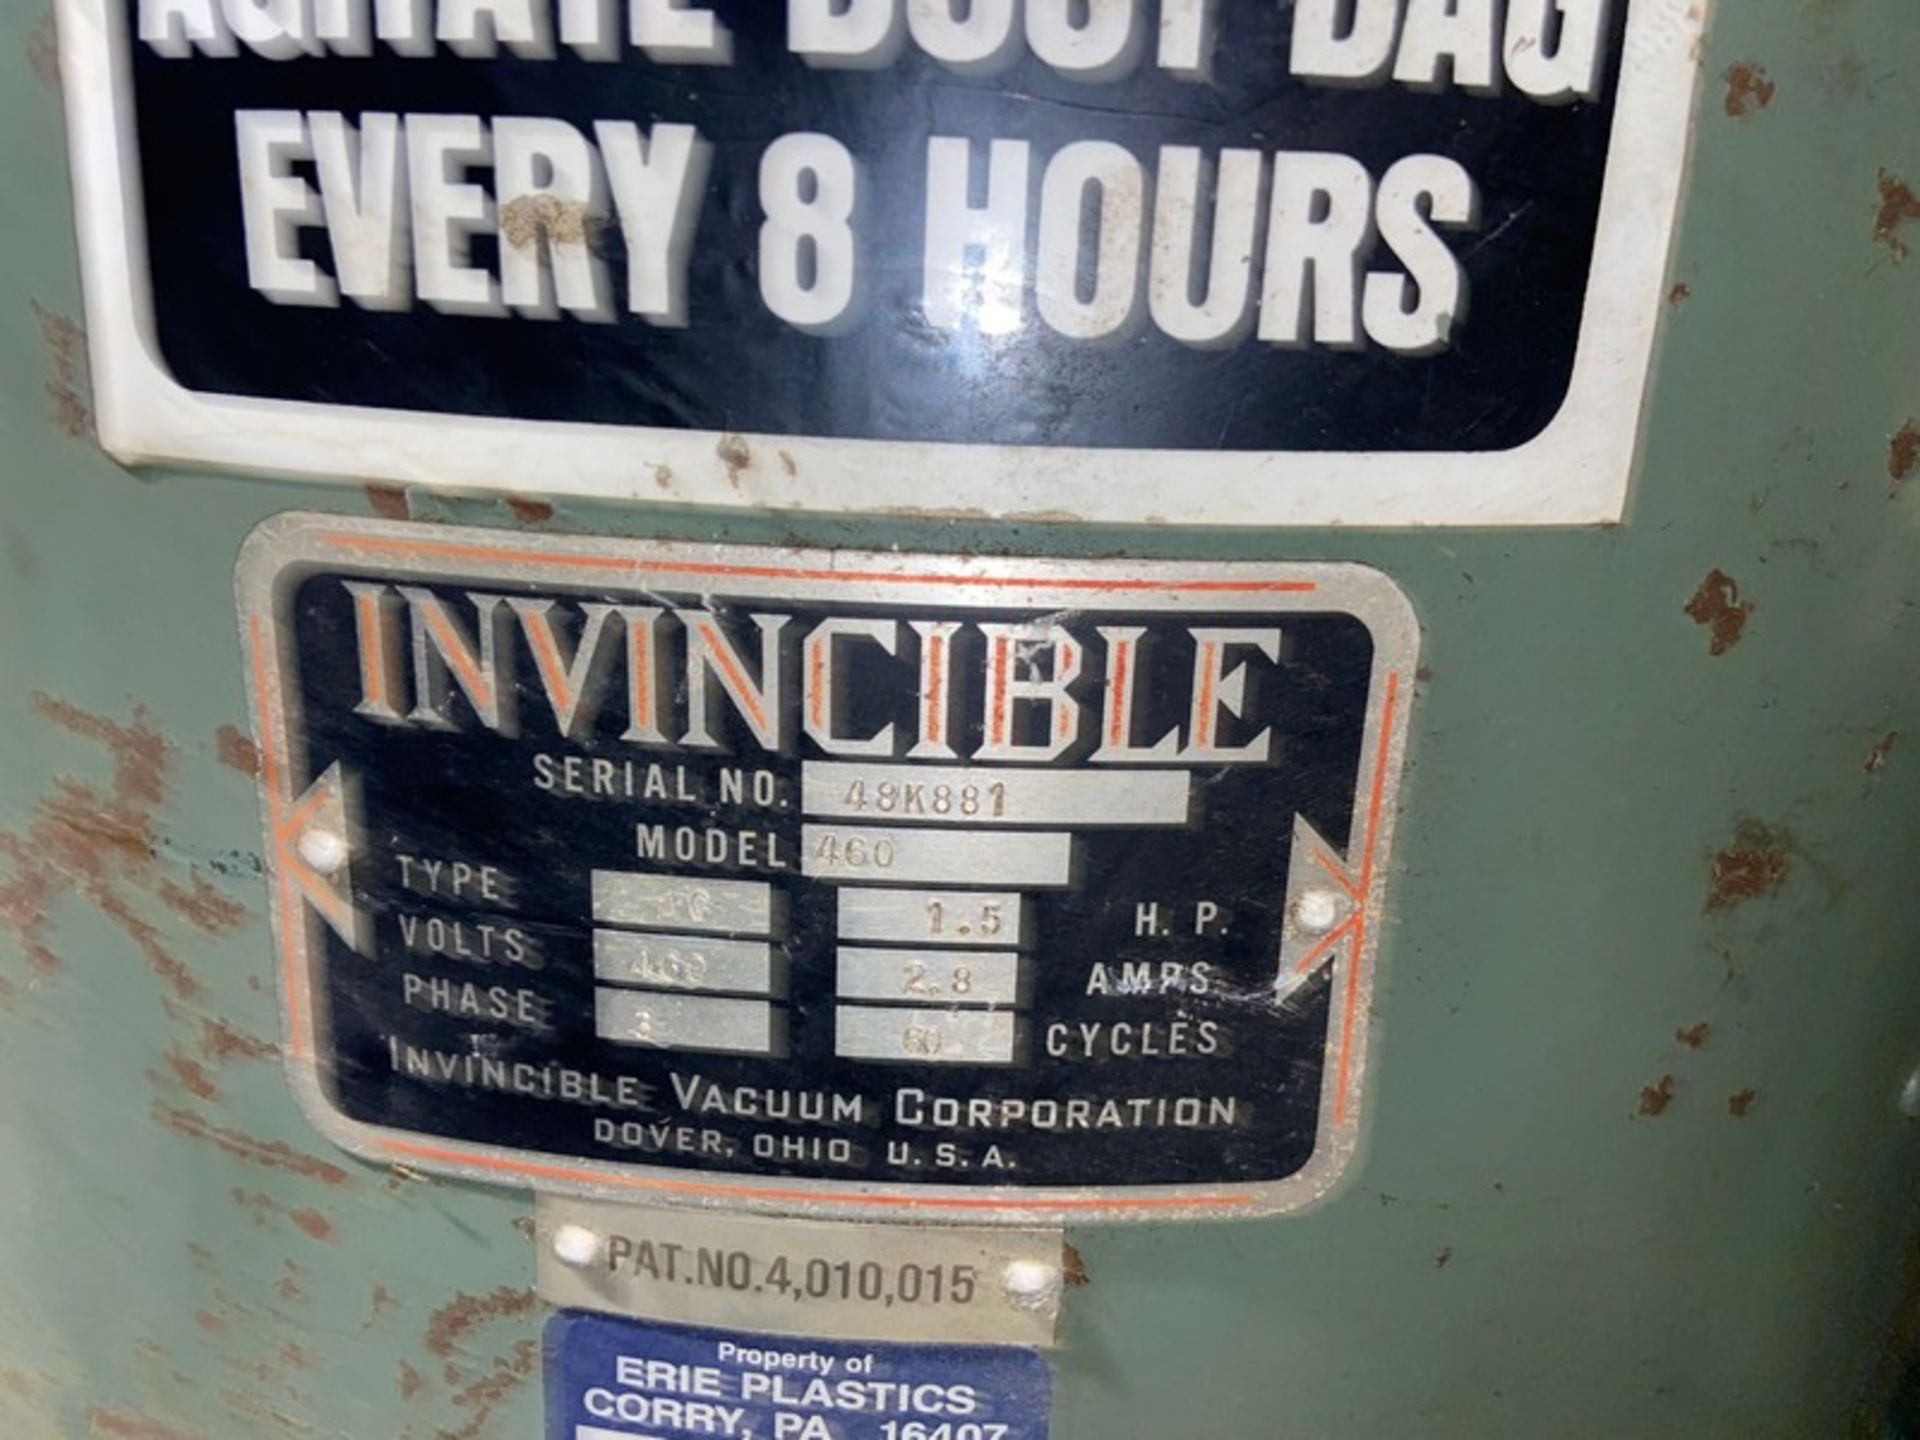 Invincible Portable Dust Collector, M/N 460, S/N 48K881, 460 Volts, 3 Phase (LOCATED IN CORRY, PA) - Image 4 of 4